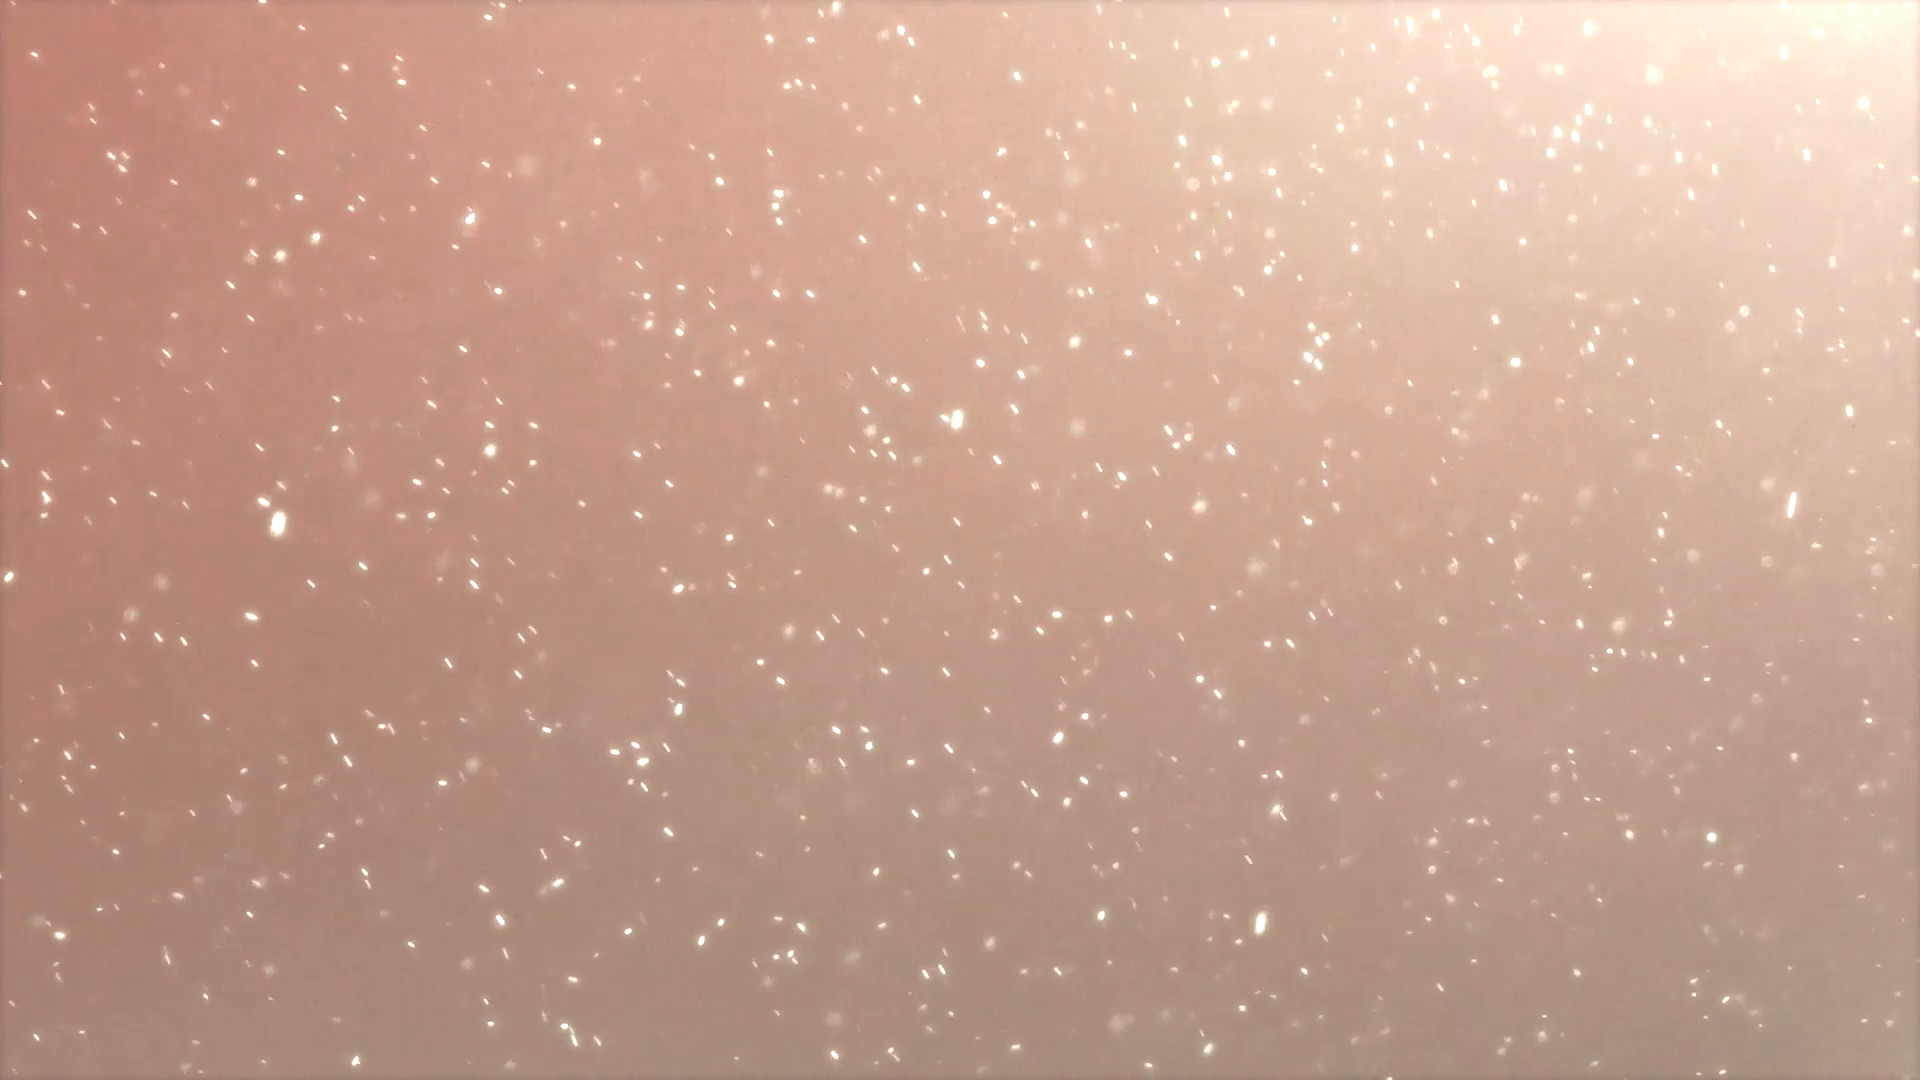 1920x1080 Flying particles 8 - magic snow, dust - Fairytale snowflake - Background